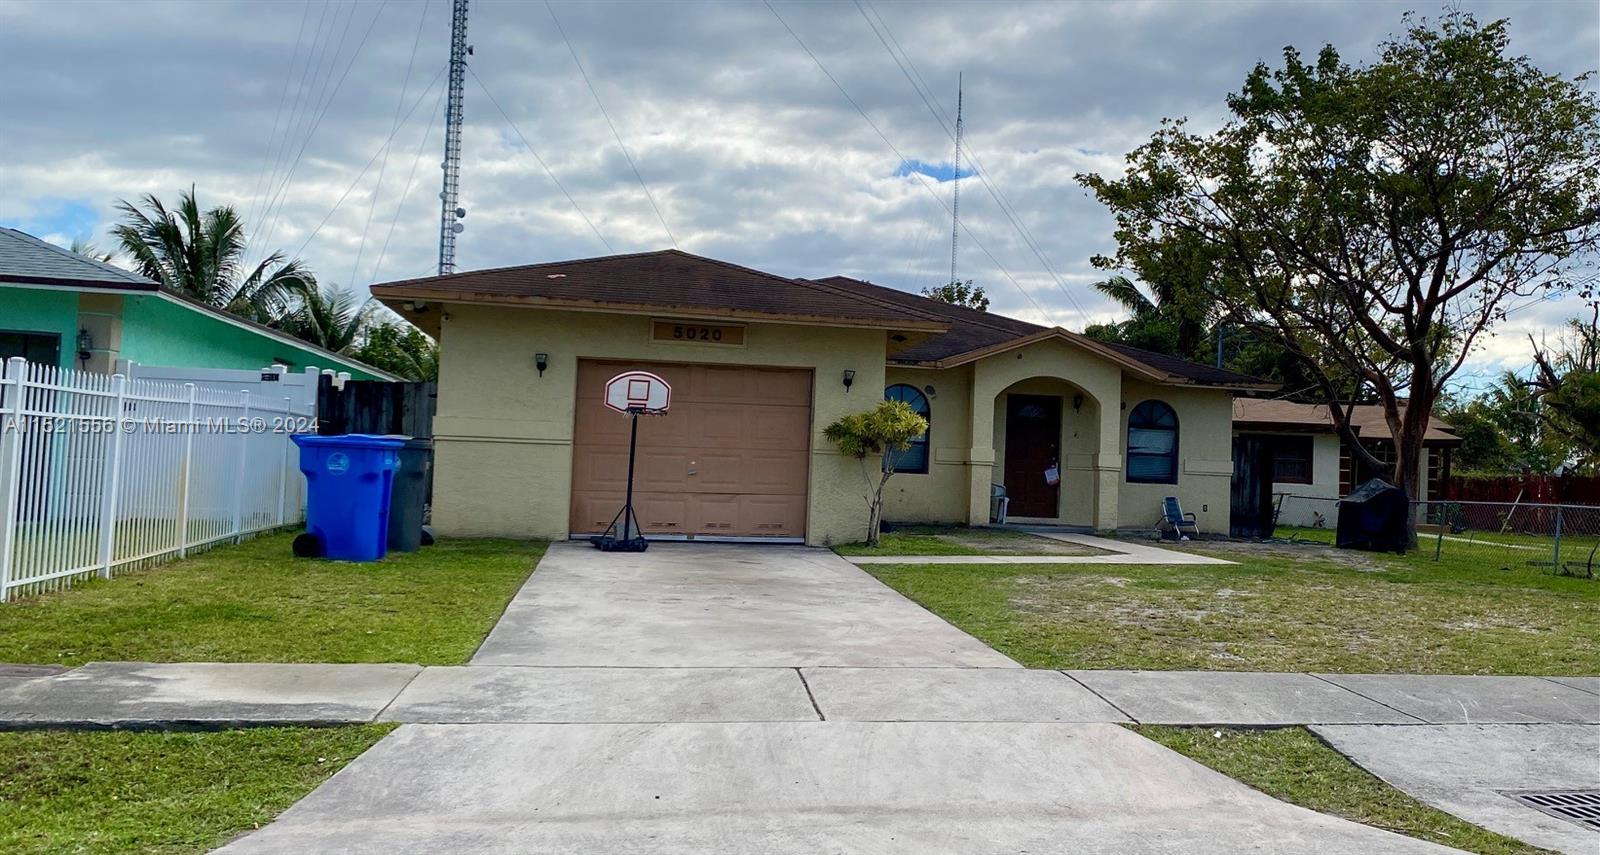 Property for Sale at Address Not Disclosed, West Park, Broward County, Florida - Bedrooms: 4 
Bathrooms: 2  - $600,000